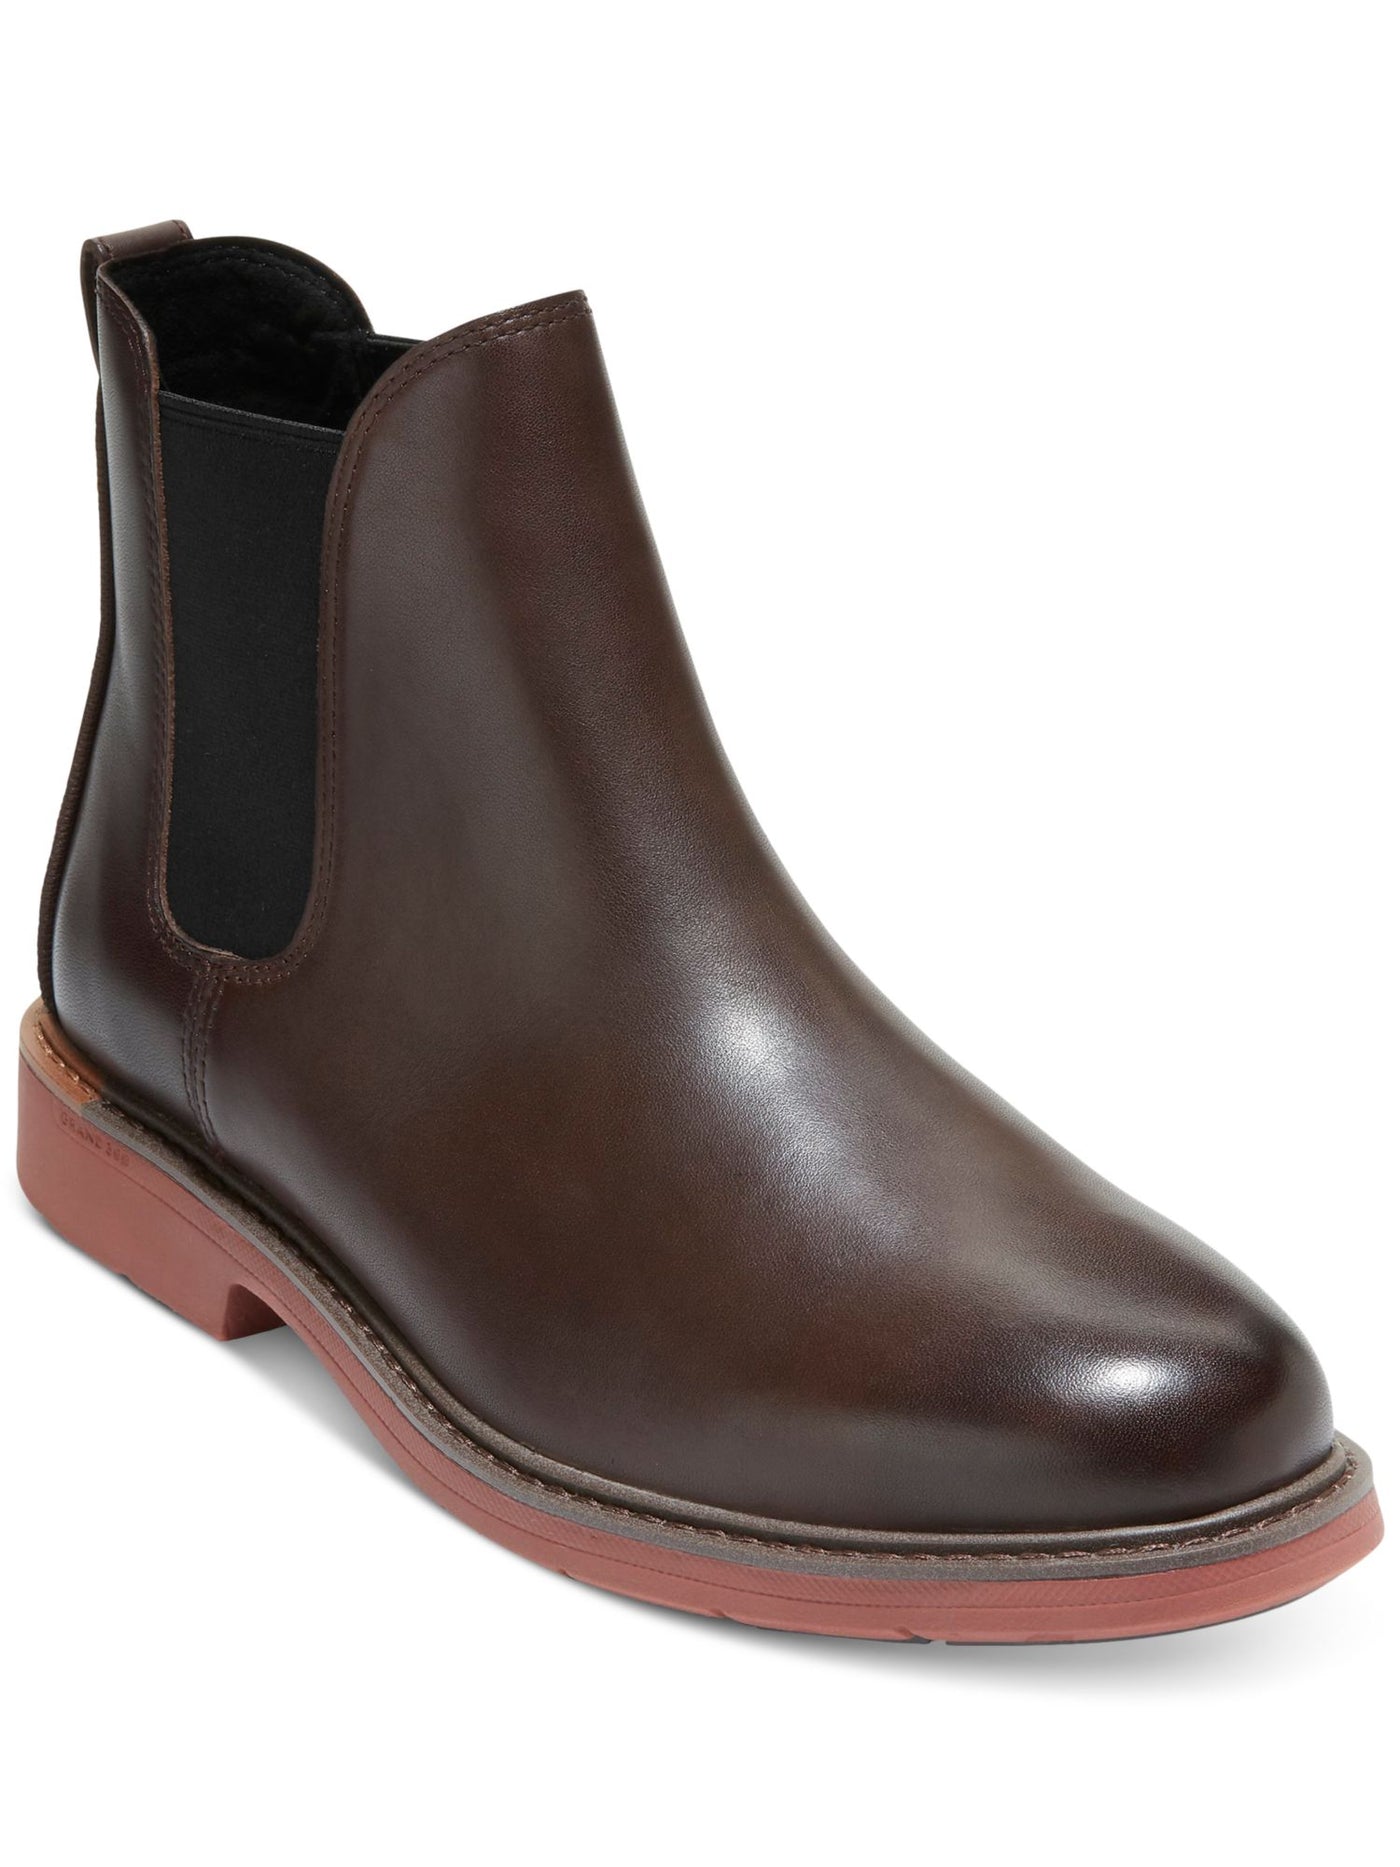 COLE HAAN GRANDSERIES Mens Brown Pull Tab Goring Cushioned Go-to Round Toe Block Heel Leather Chelsea 7.5 M